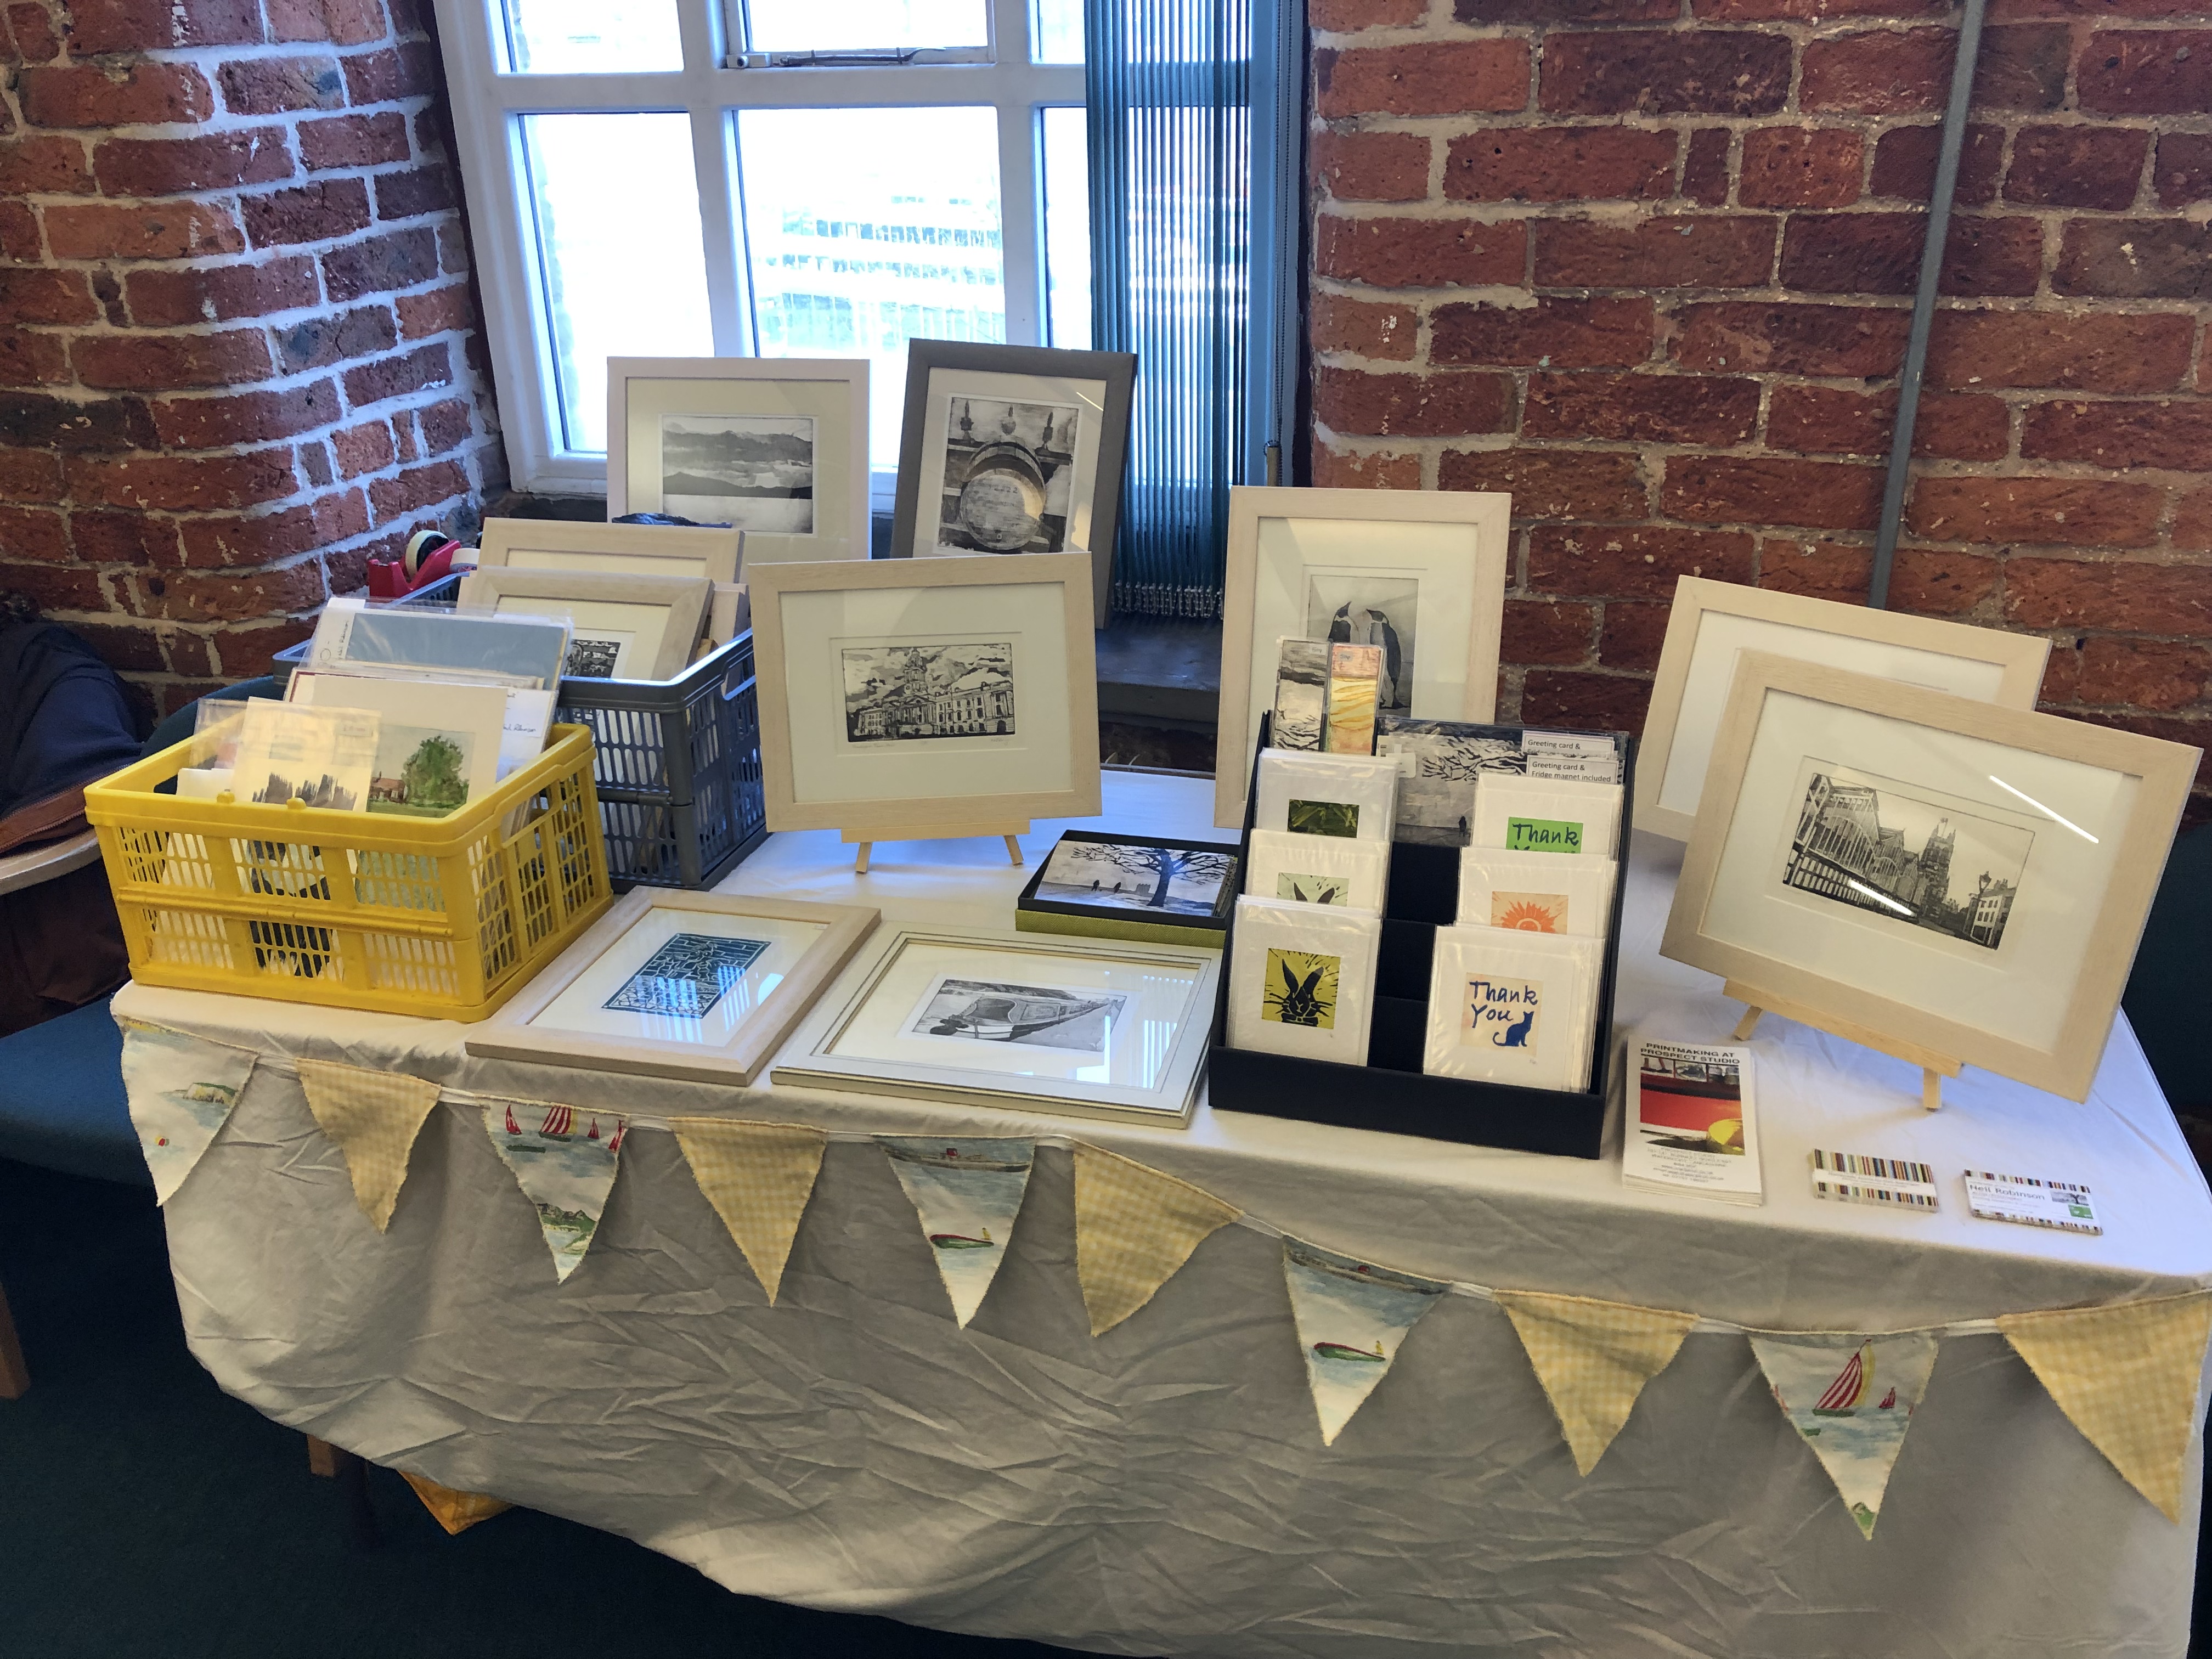 My stall at the Manchester Print Fair, Hatworks,Stockport on 2nd February.